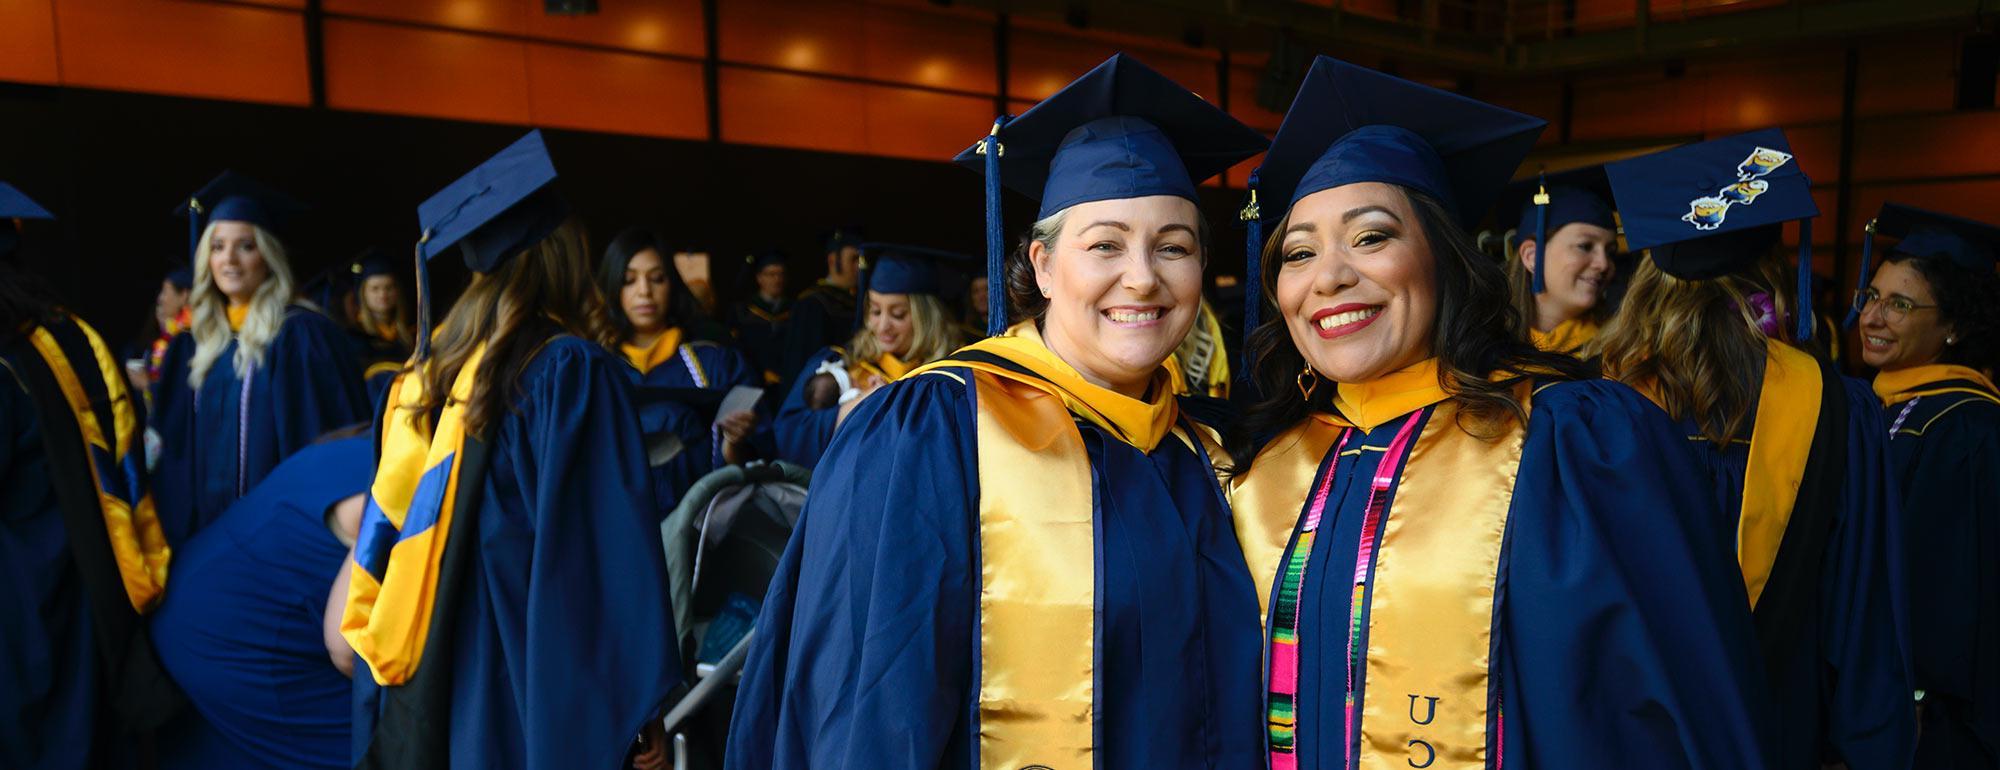 Two nursing school students celebrate during their graduation ceremony